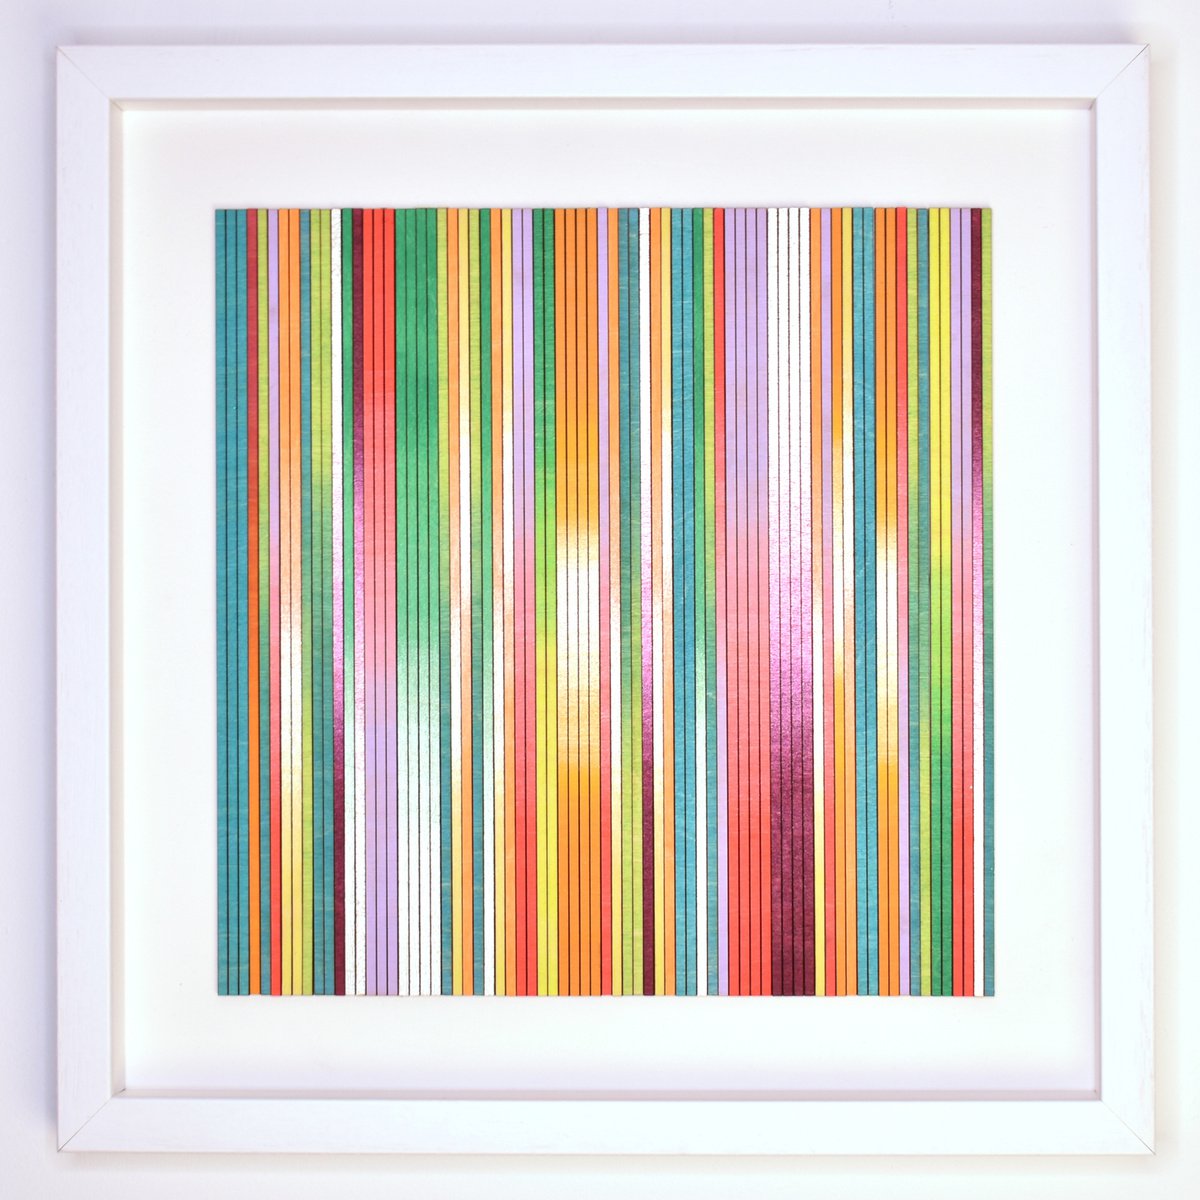 Abstract stripe wood panel collage by Amelia Coward